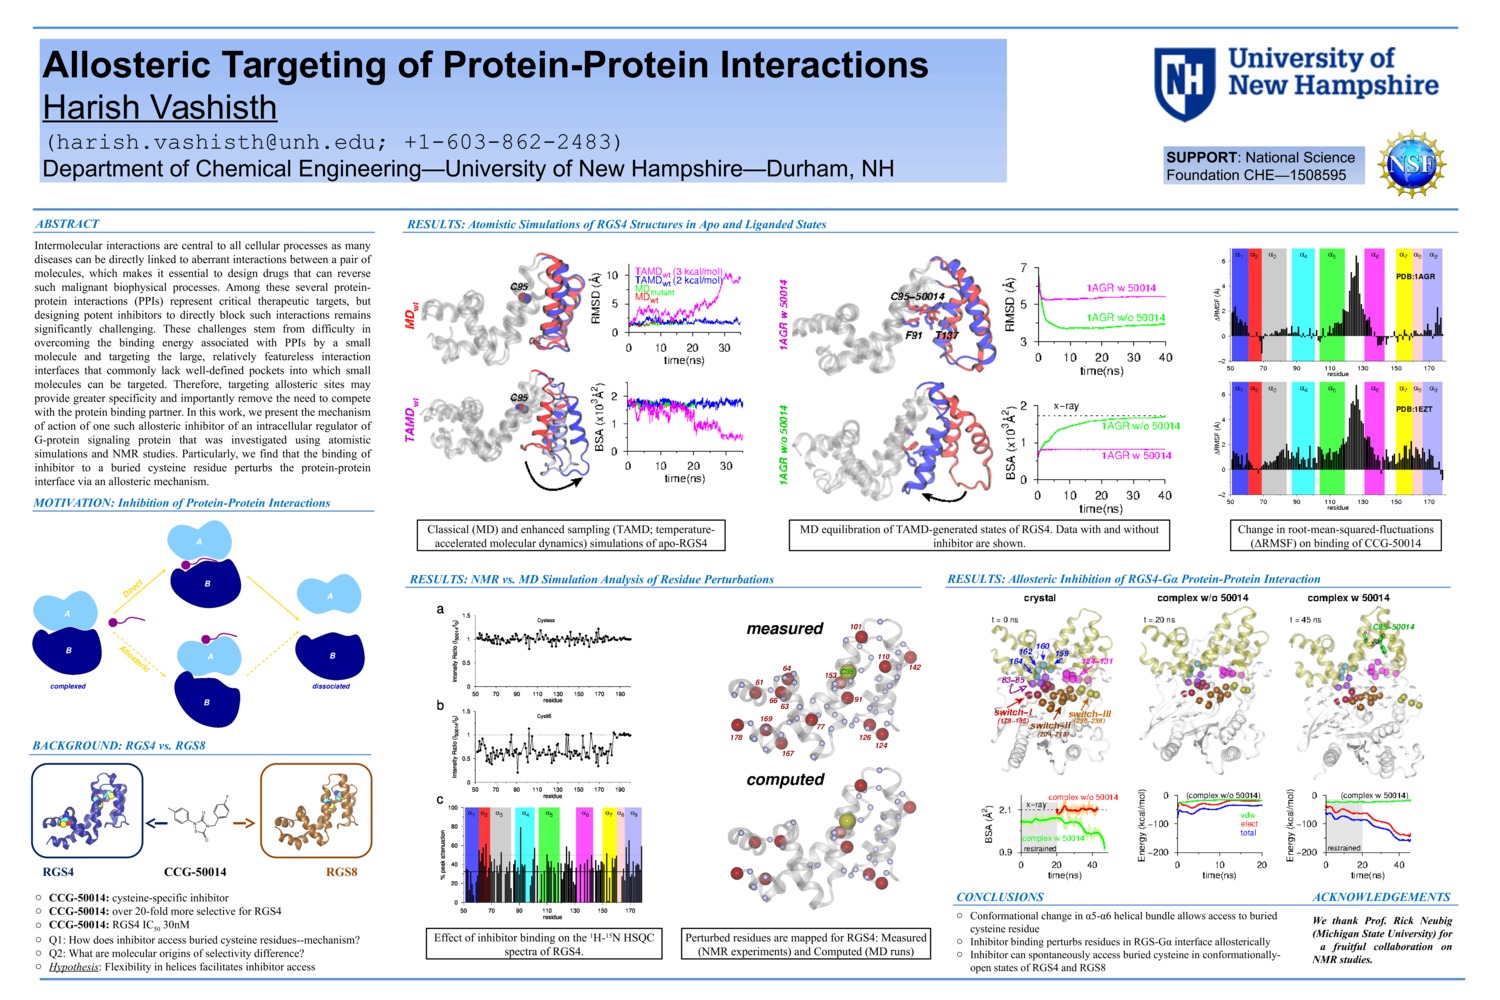 Allosteric Targeting Of Protein-Protein Interactions by hm2006